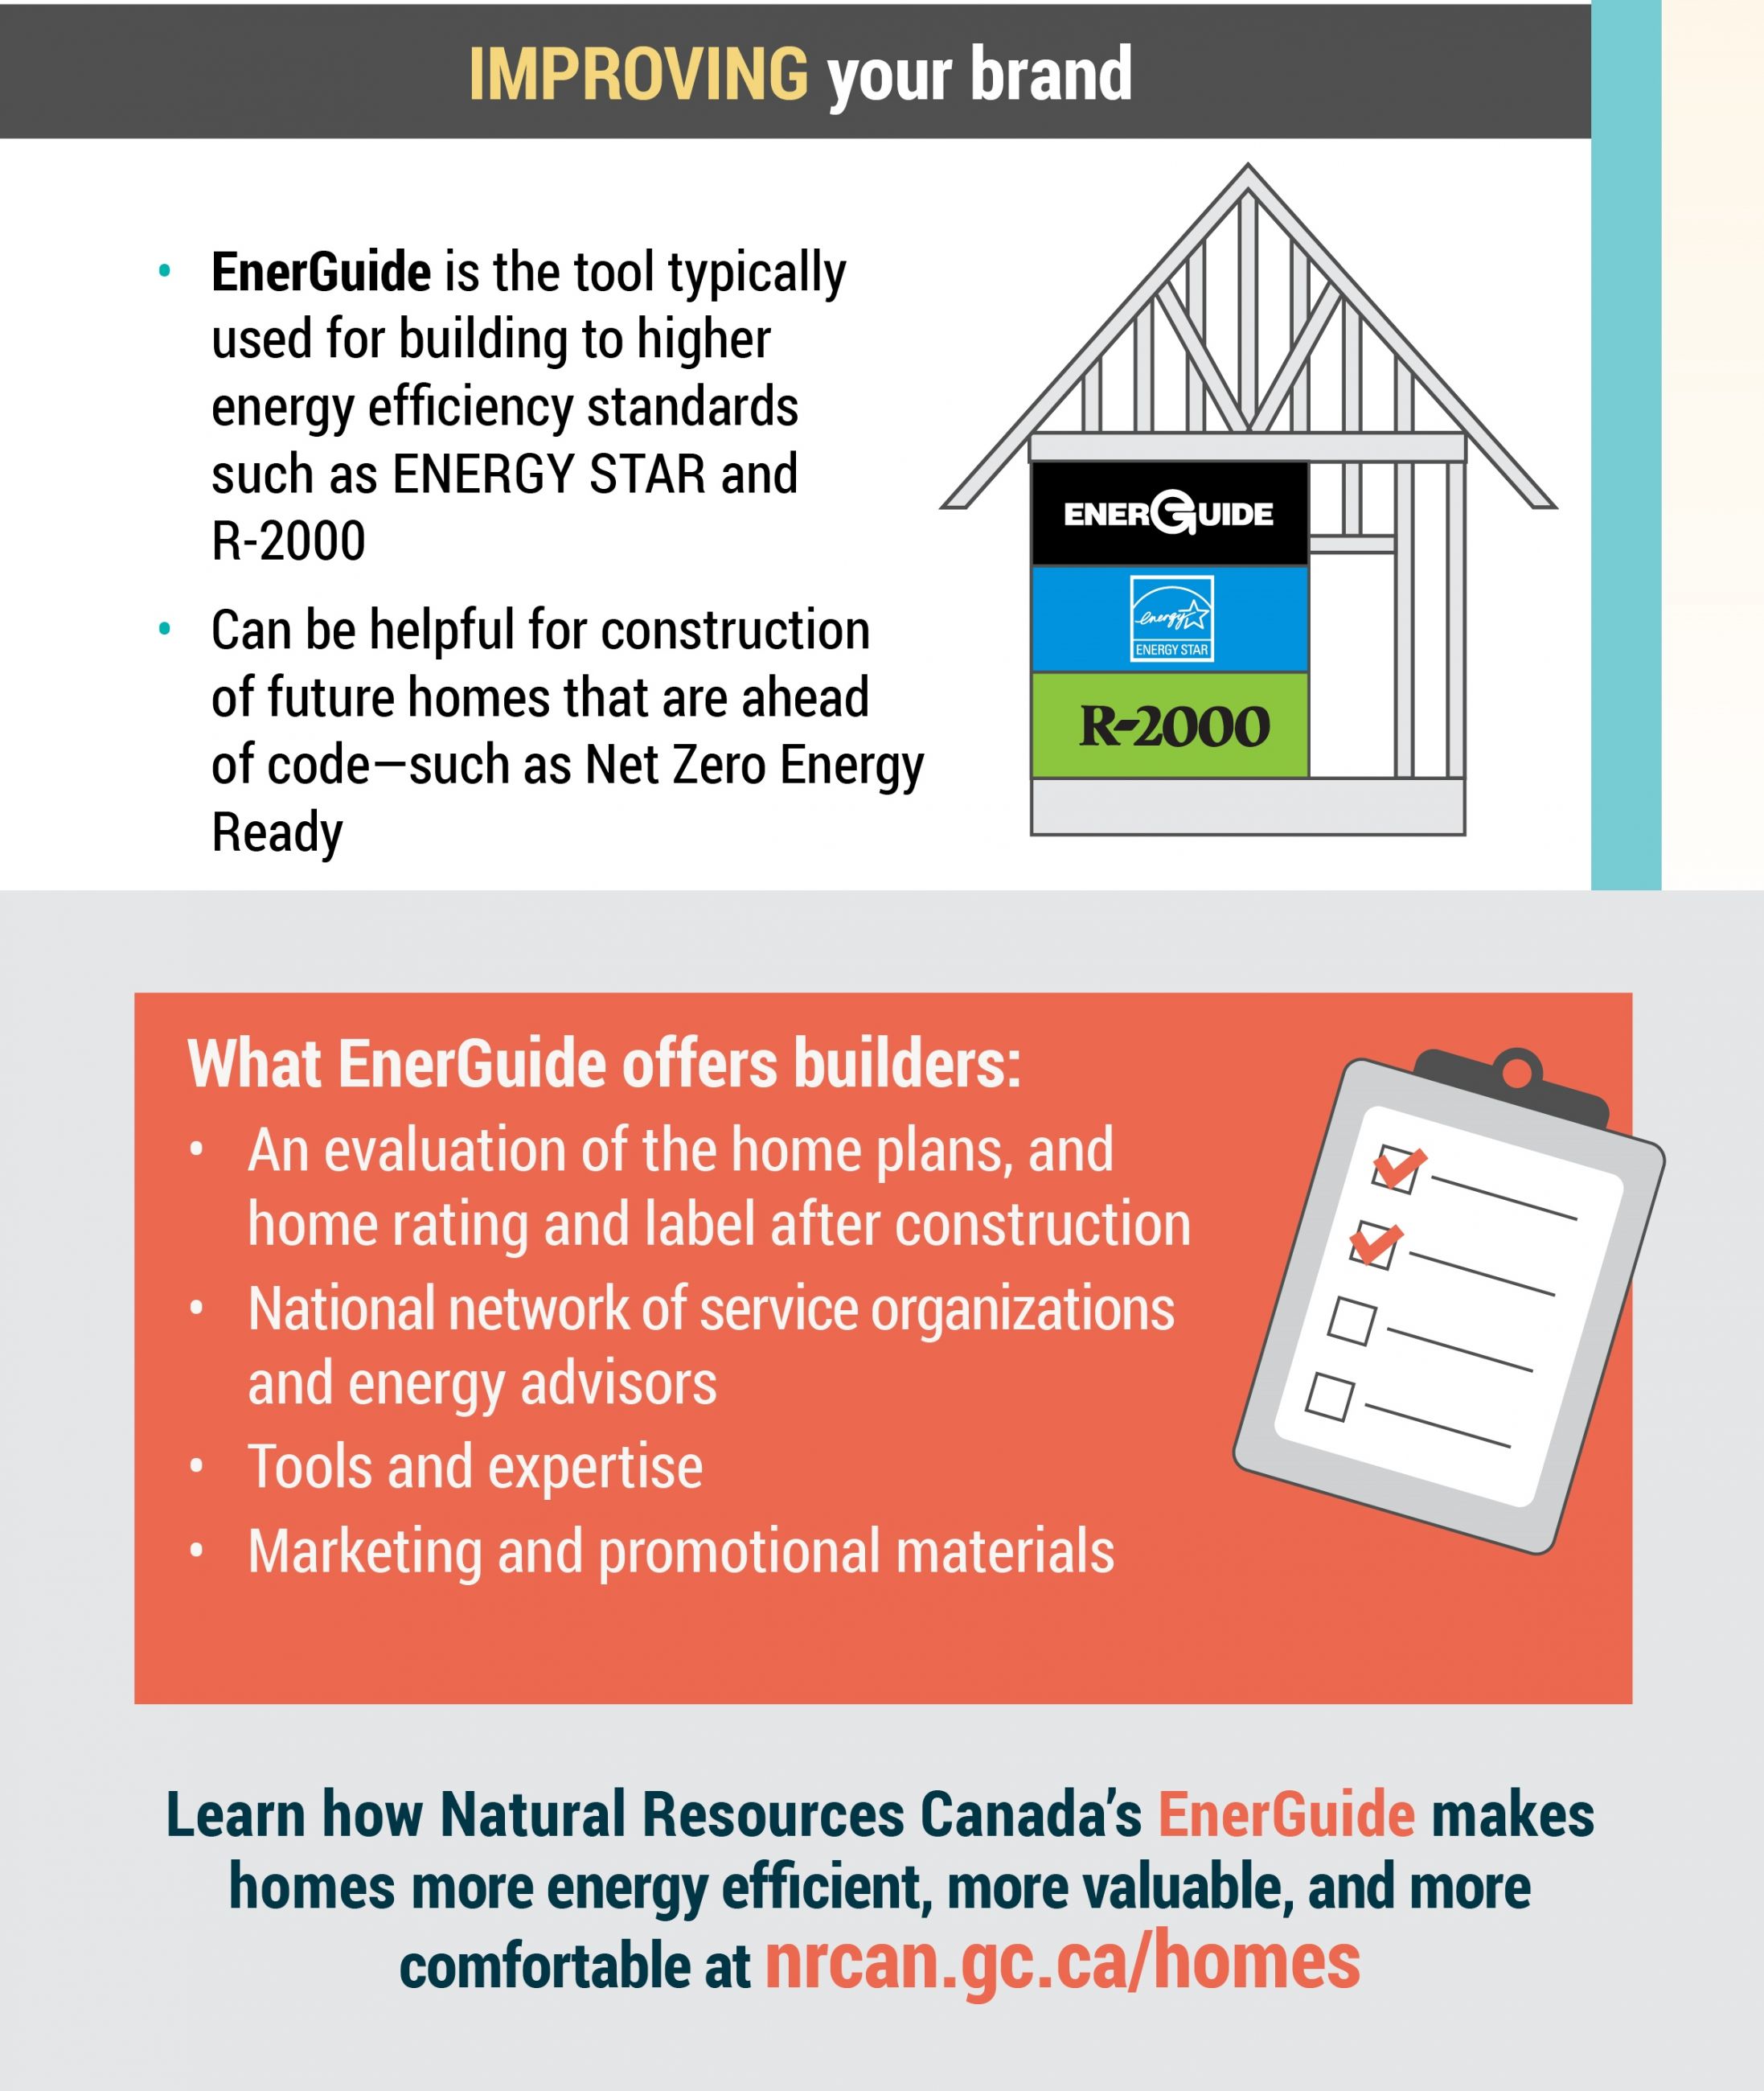 Improving your brand and what EnerGuide offers builders